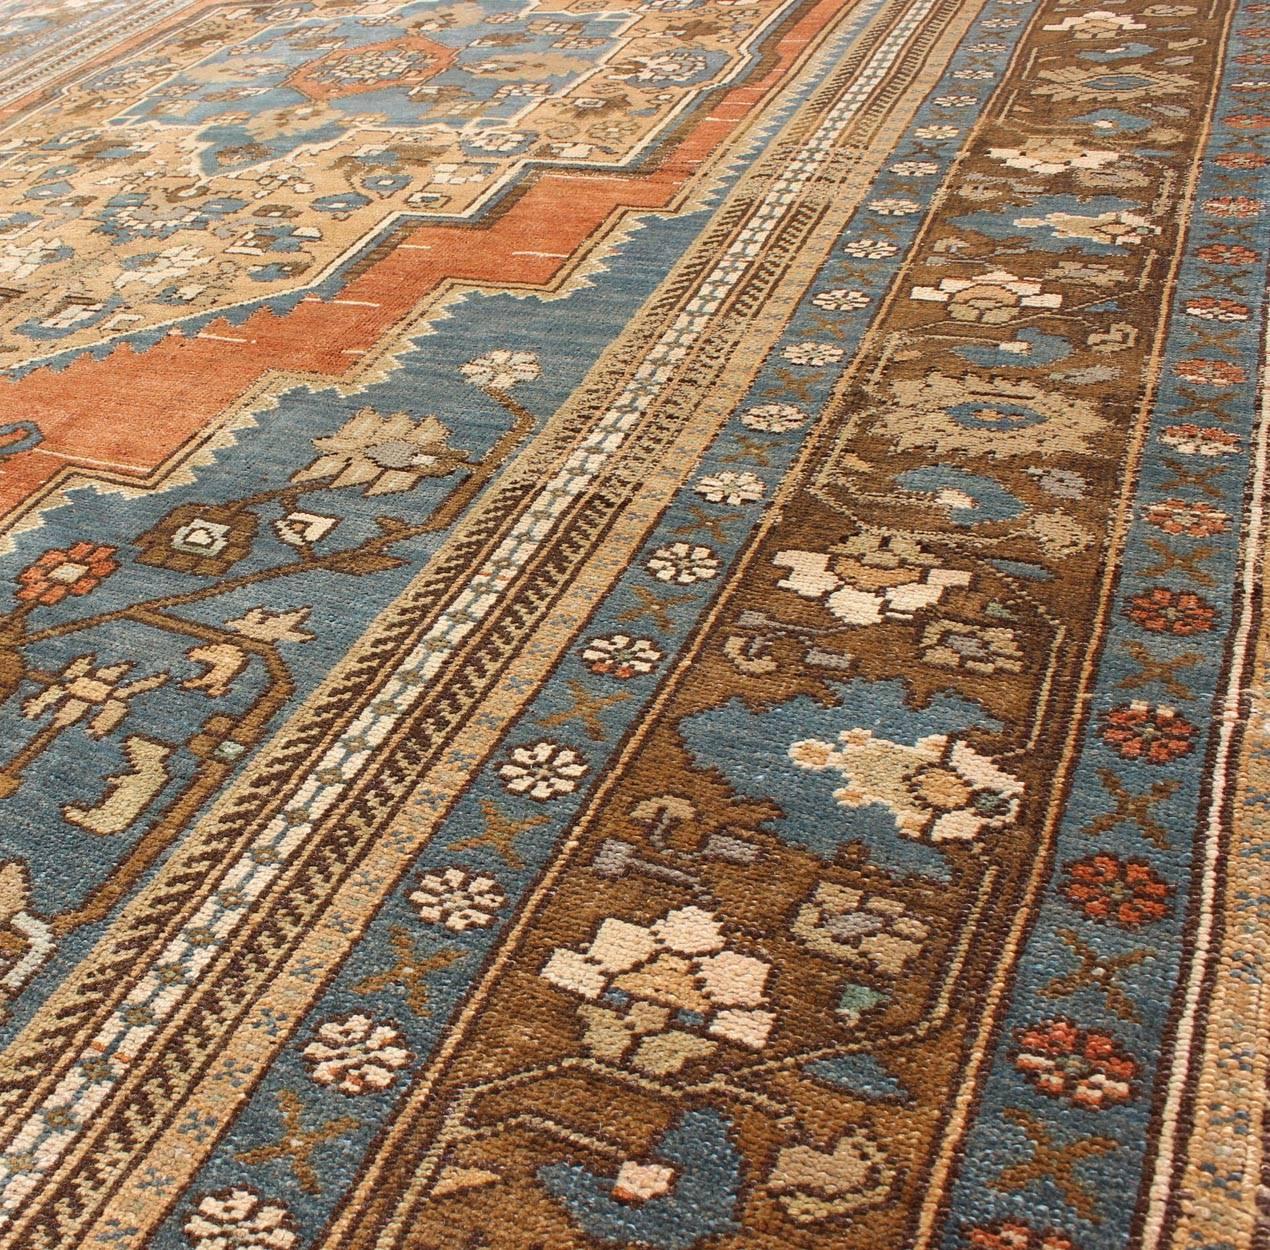 Wool Antique Turkish Colorful Oushak Gallery Rug In Blue Brown & Terra-cotta For Sale